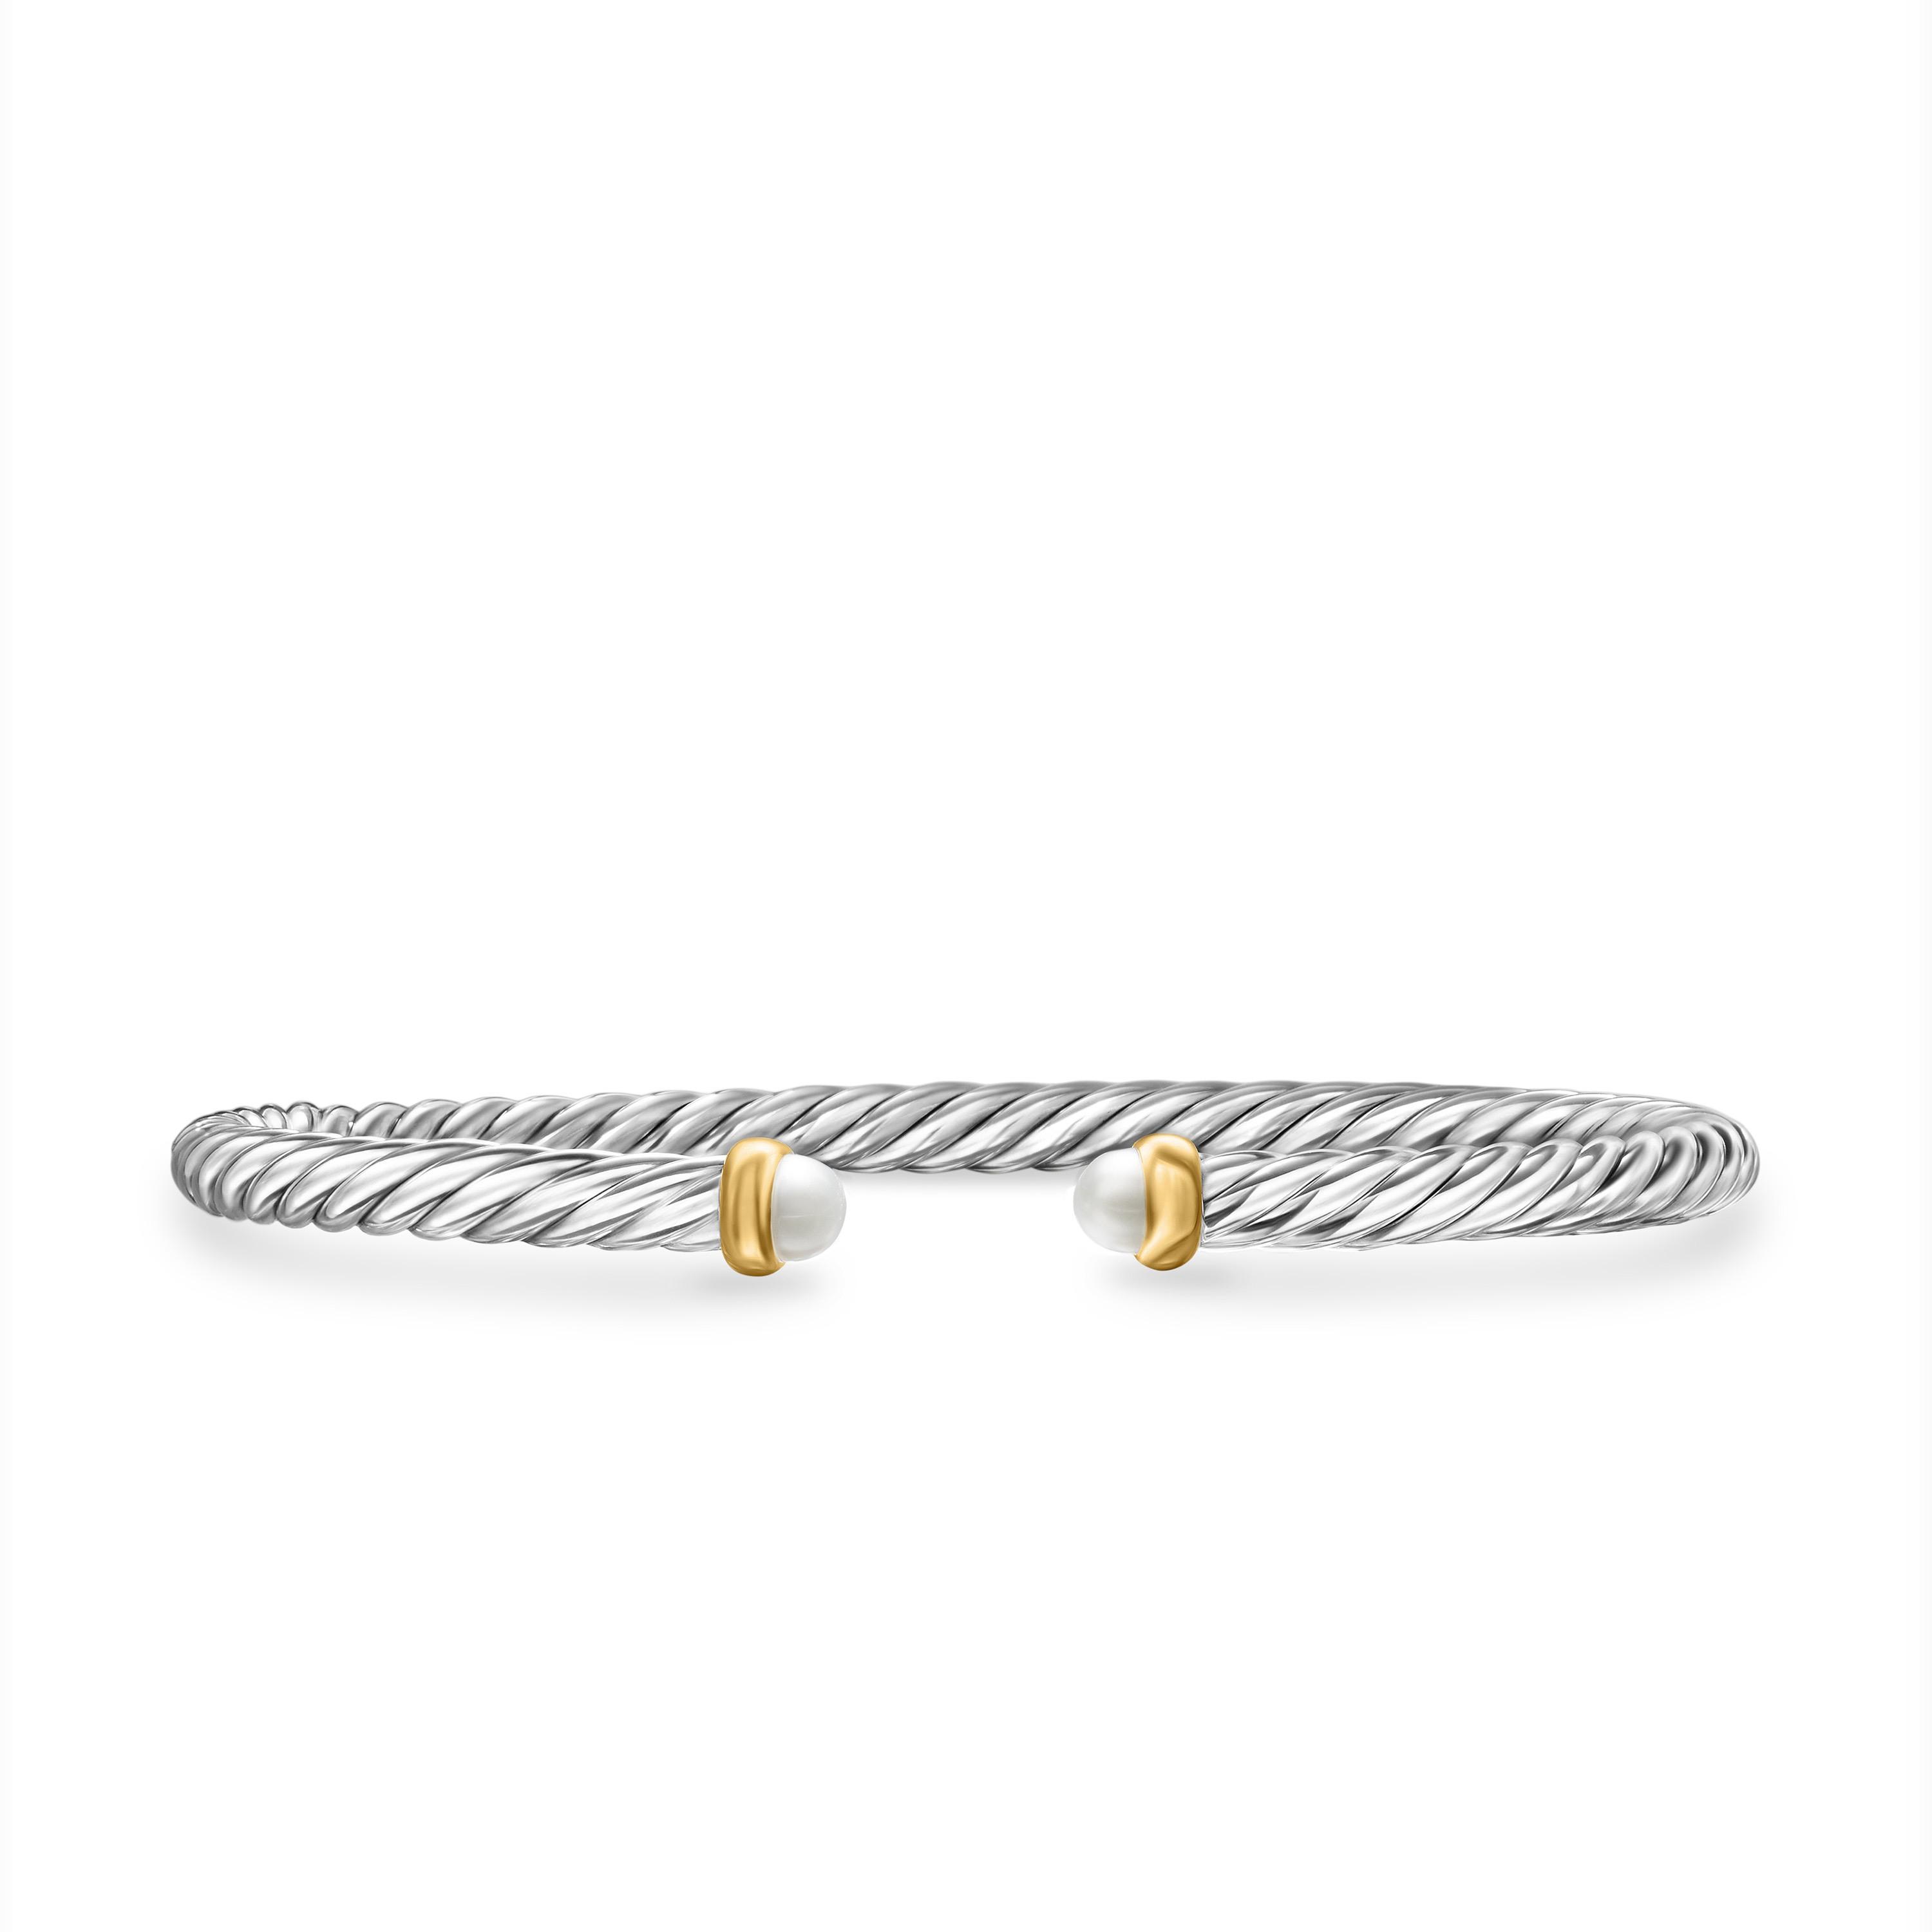 David Yurman Cable Flex Sterling Silver Bracelet with Pearl, Size Small 0